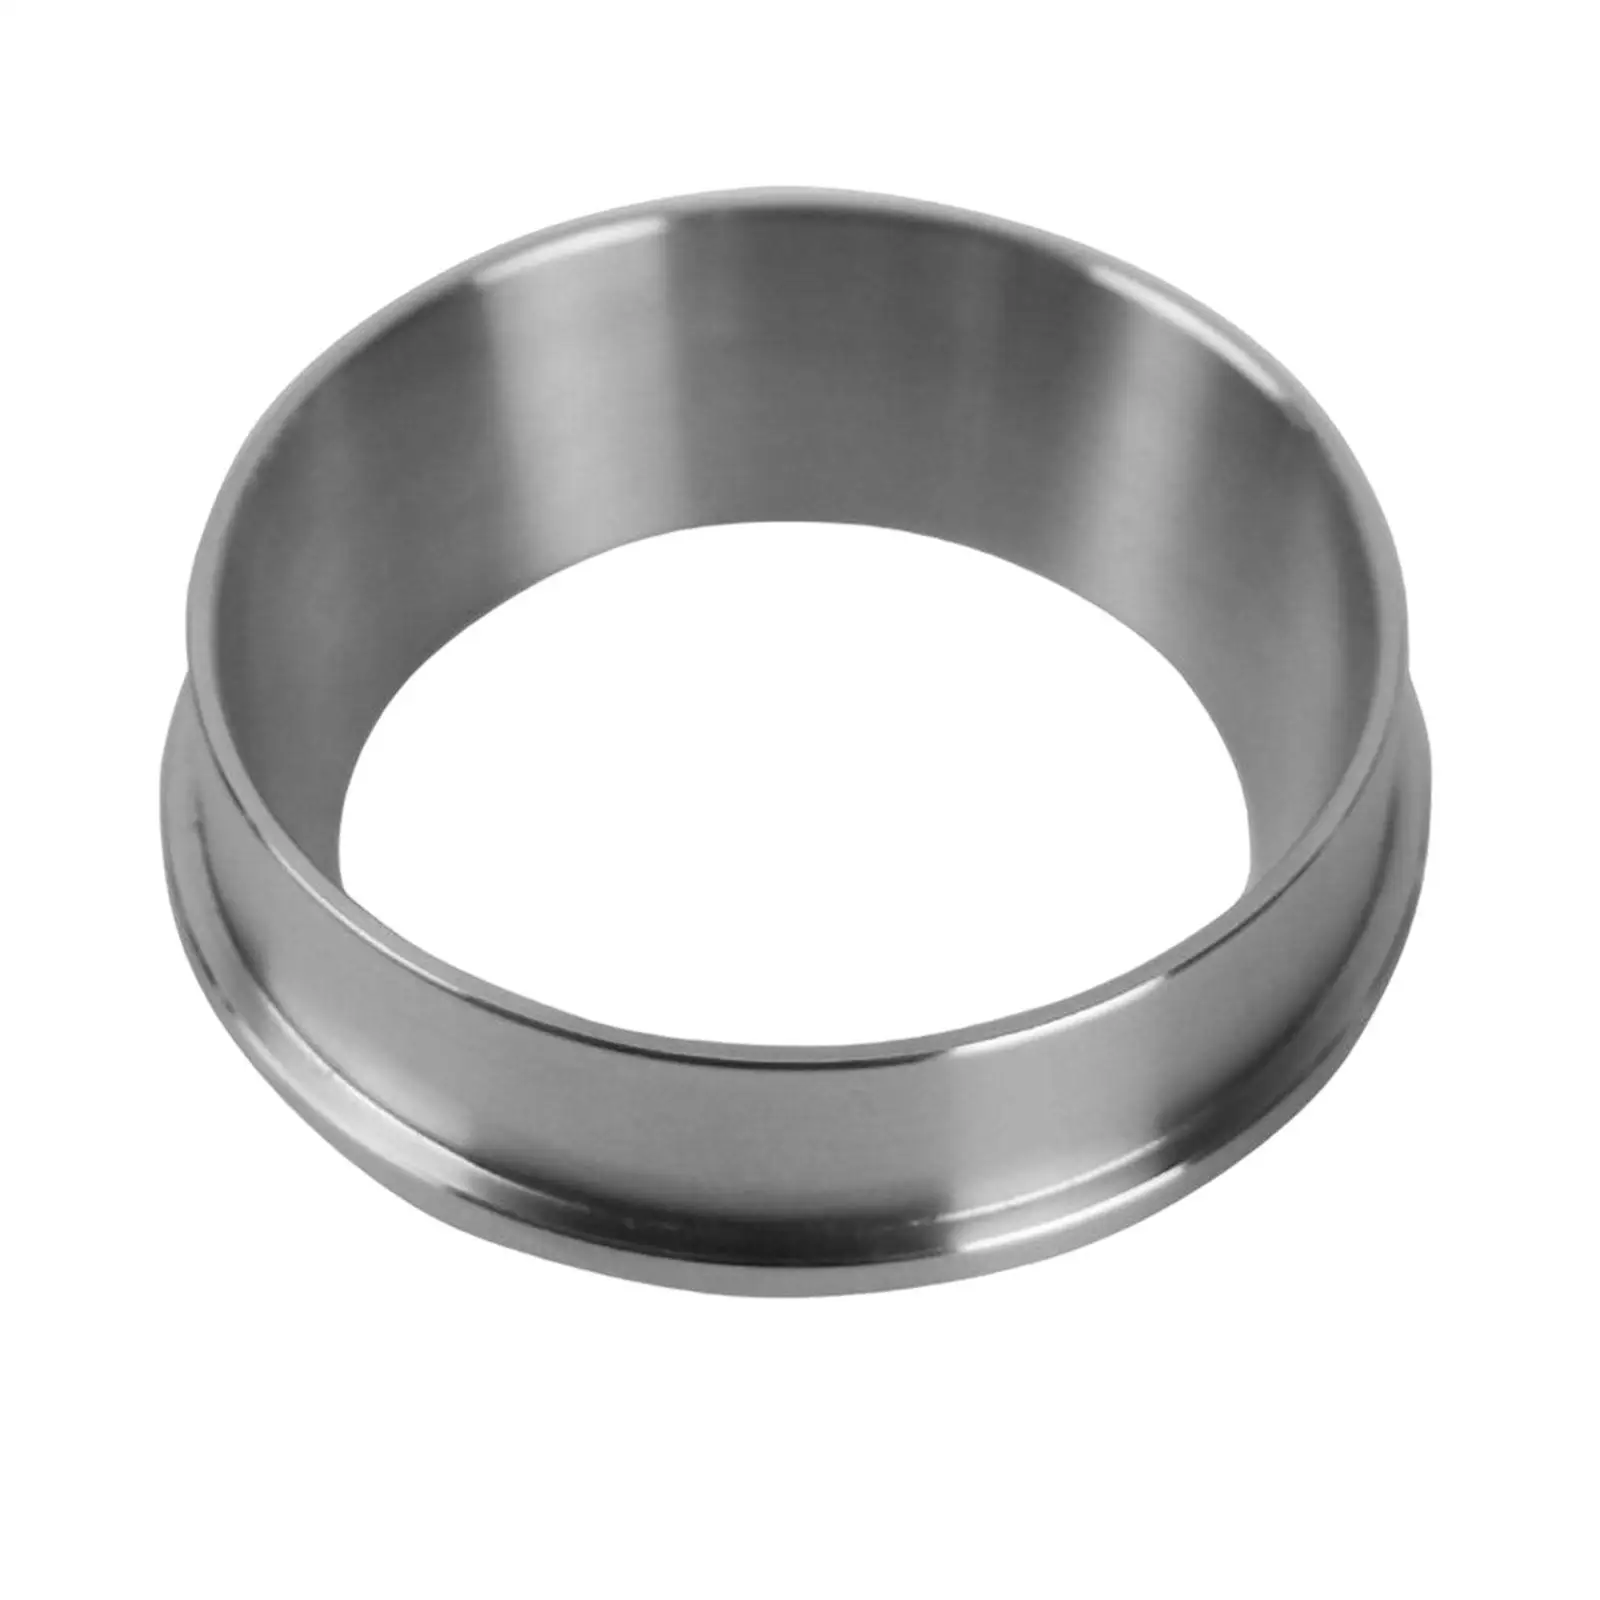 Espresso Dosing Rings Funnel 304 Stainless Steel Fine Workmanship Simple Design Accessories Durable Replacement Easily Clean